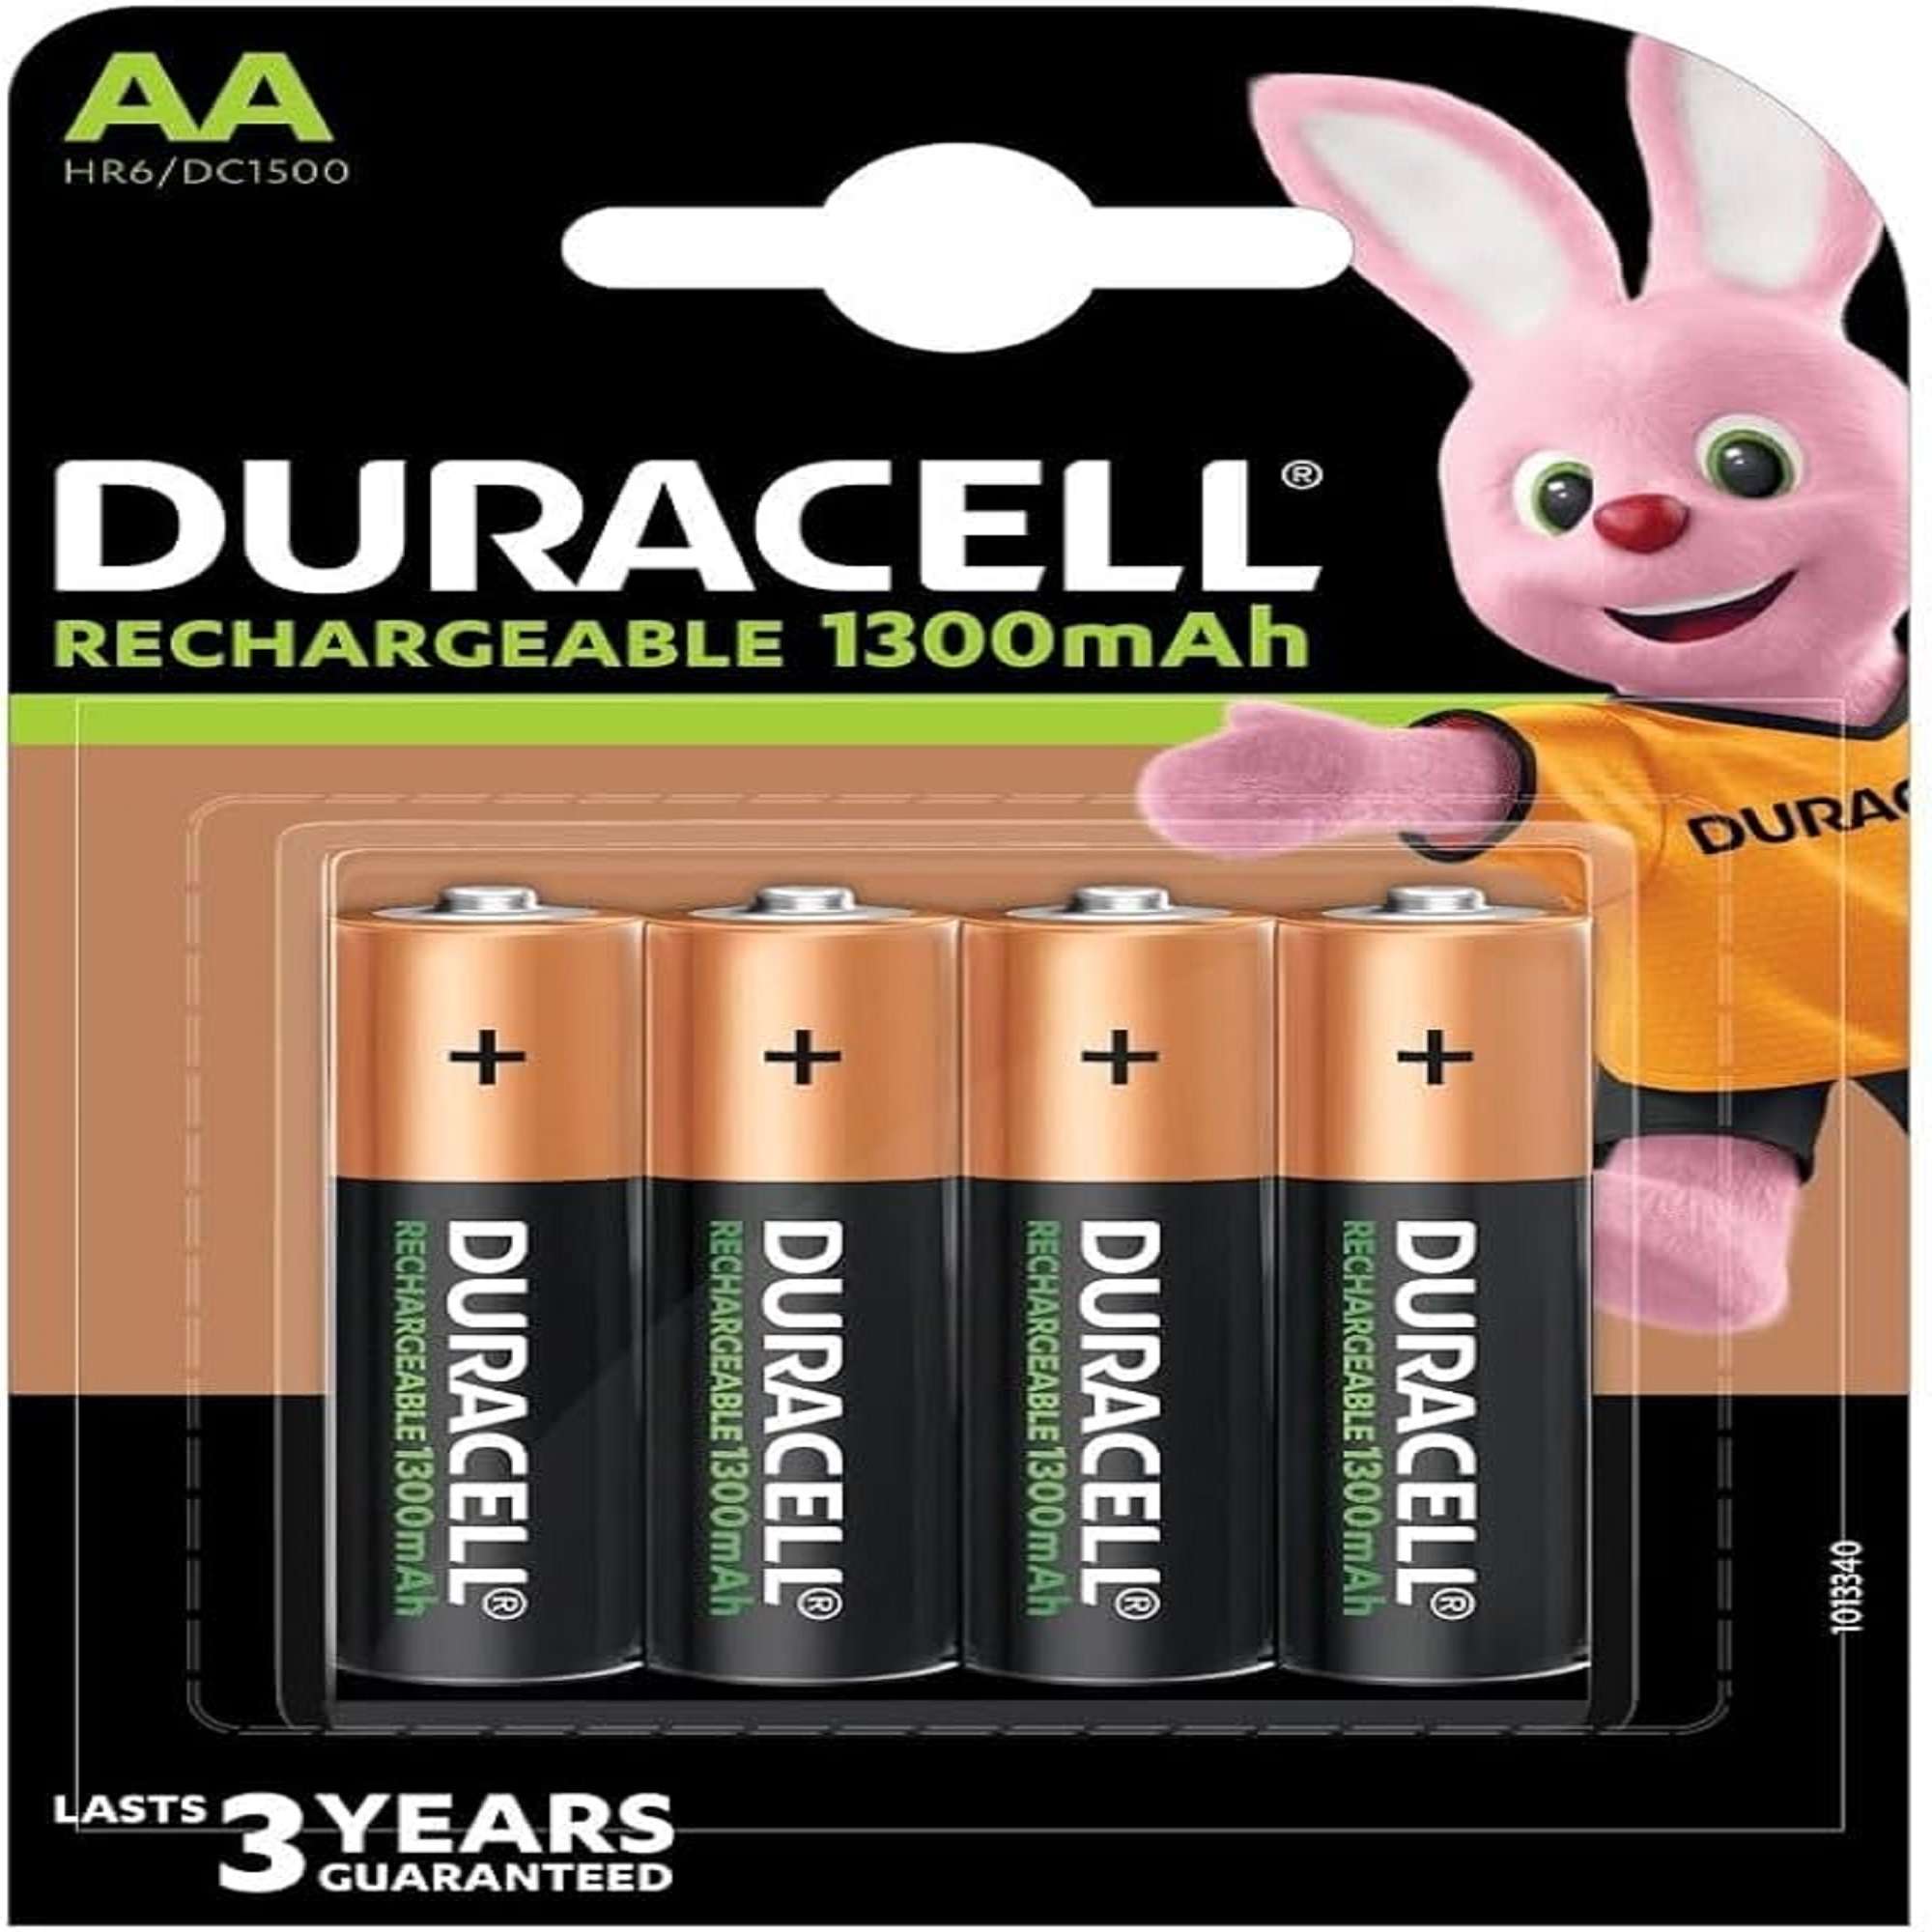 Rechargeable stylus batteries, blister with 4 batteries - DURACELL AA 4